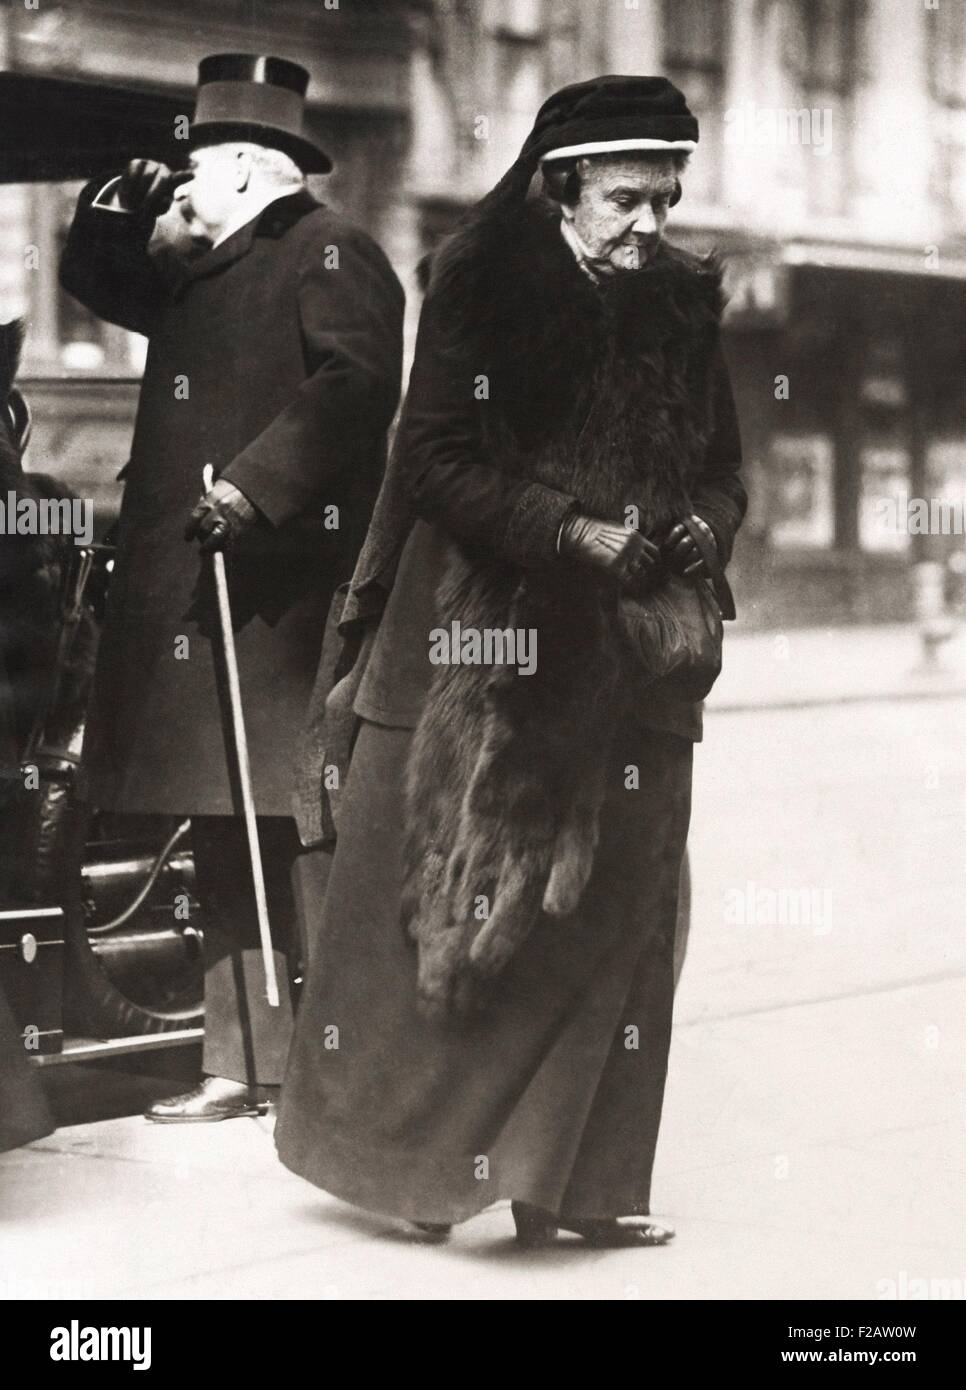 Frances Louisa Tracy Morgan, widow of J.P. Morgan Sr. attending the funeral of John L. Cadwalder. At left is her son, John Pierpont Morgan, Jr. March 14, 1914. John Lambert Cadwalader was a prominent lawyer who served on the boards of NYC most important cultural institutions, including the Metropolitan Museum and New York Public Library, (CSU 2015 11 1511) Stock Photo